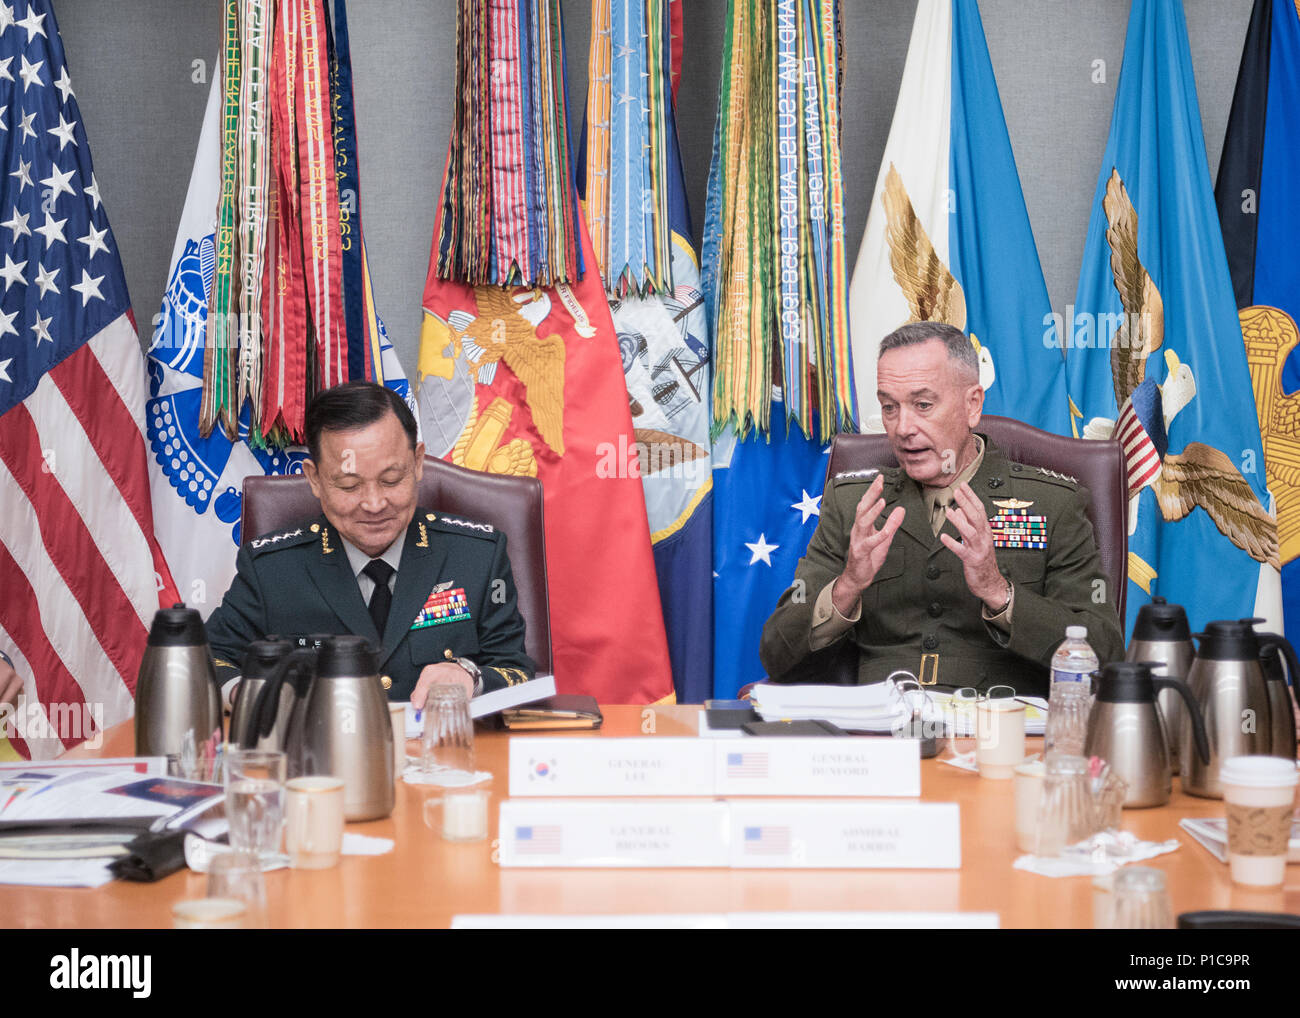 Chairman of the Joint Chiefs of Staff General Joseph F. Dunford hosted his Republic of Korea counterpart Gen. Lee Sun Jin for the 41st ROK-U.S. Military Committee Meeting at the Pentagon. Both senior military leaders strongly denounced North Korea's nuclear and missile provocations, stating they pose a serious threat to the Korean Peninsula, to the region, and to global peace and stability. (DoD Photos by Navy Petty Officer 2nd Class Dominique A. Pineiro) Stock Photo